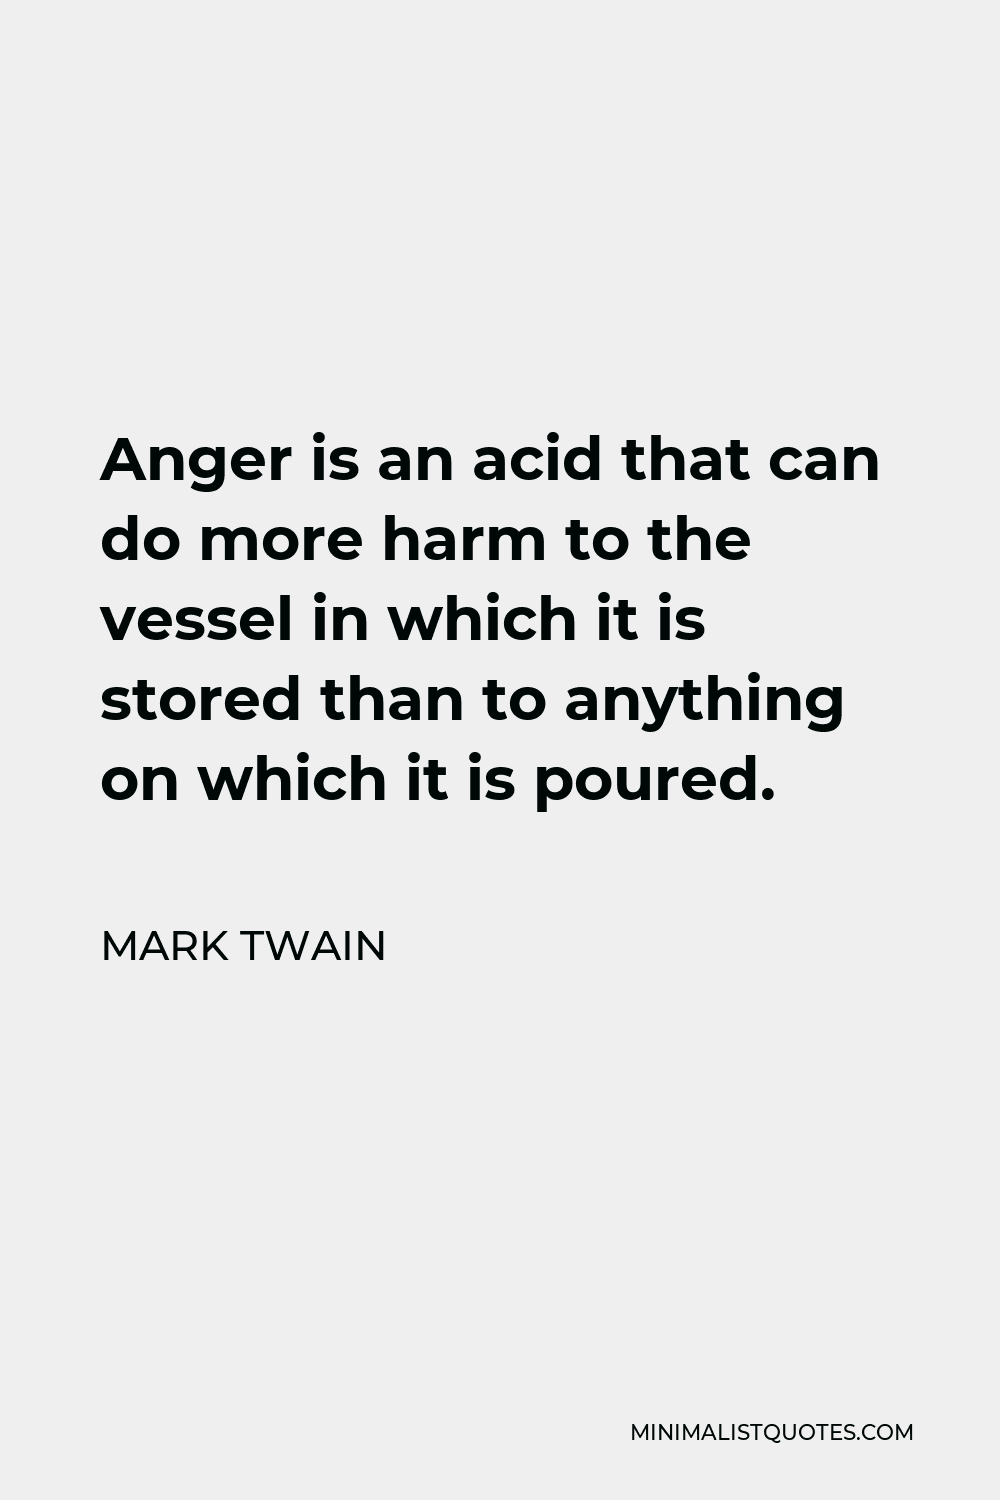 Mark Twain Quote - Anger is an acid that can do more harm to the vessel in which it is stored than to anything on which it is poured.